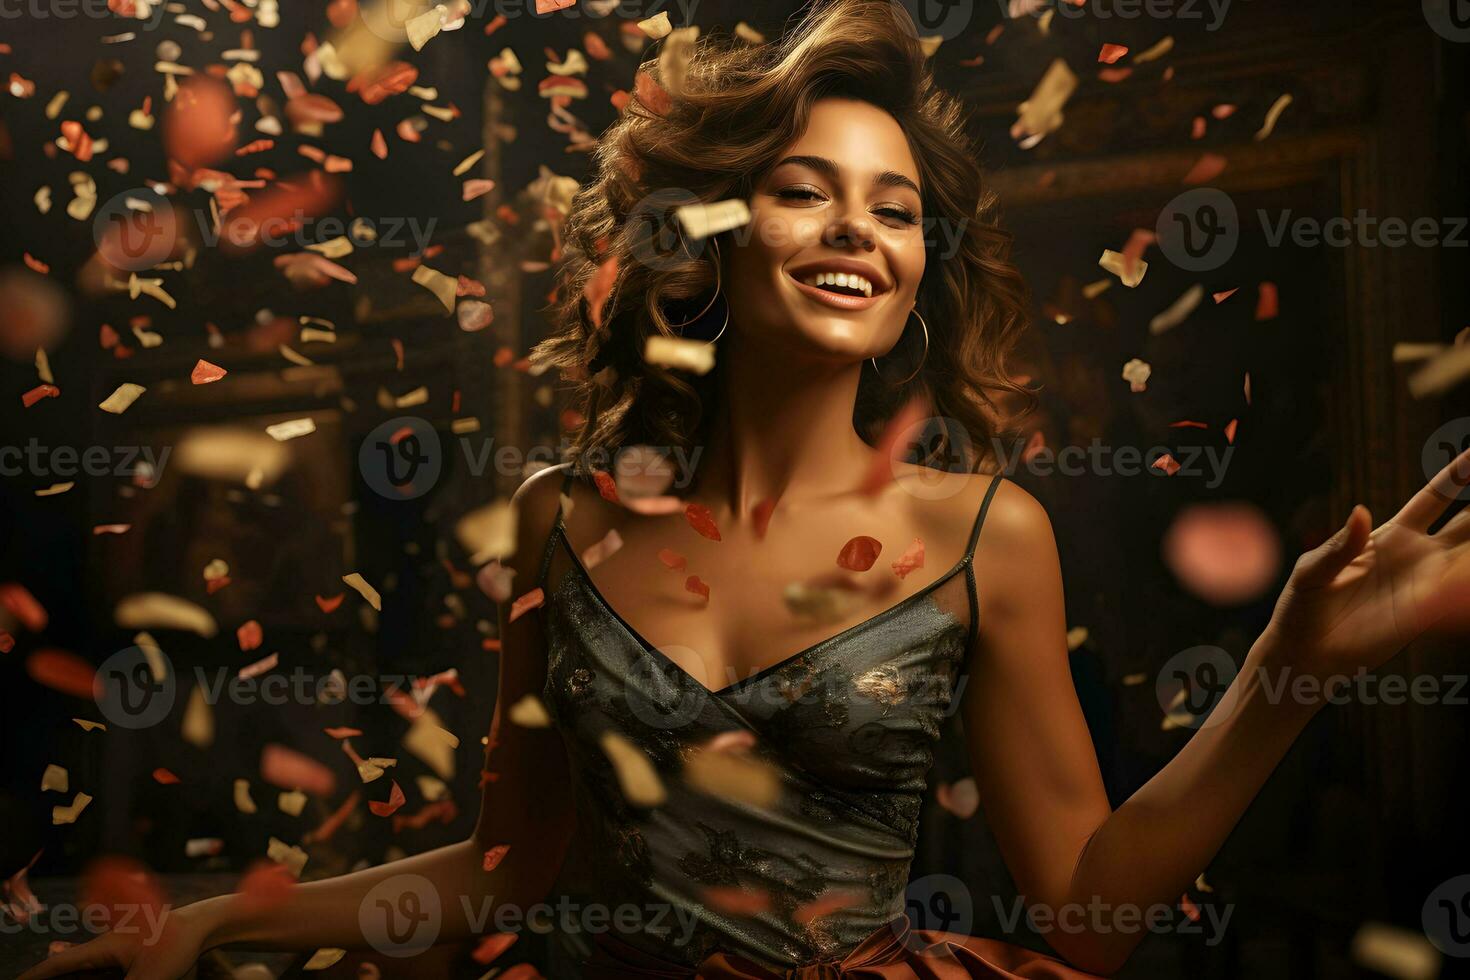 Young woman dancing under festive confetti, close up portrait. Happy glamorous new years eve celebration, birthday or party concept. photo